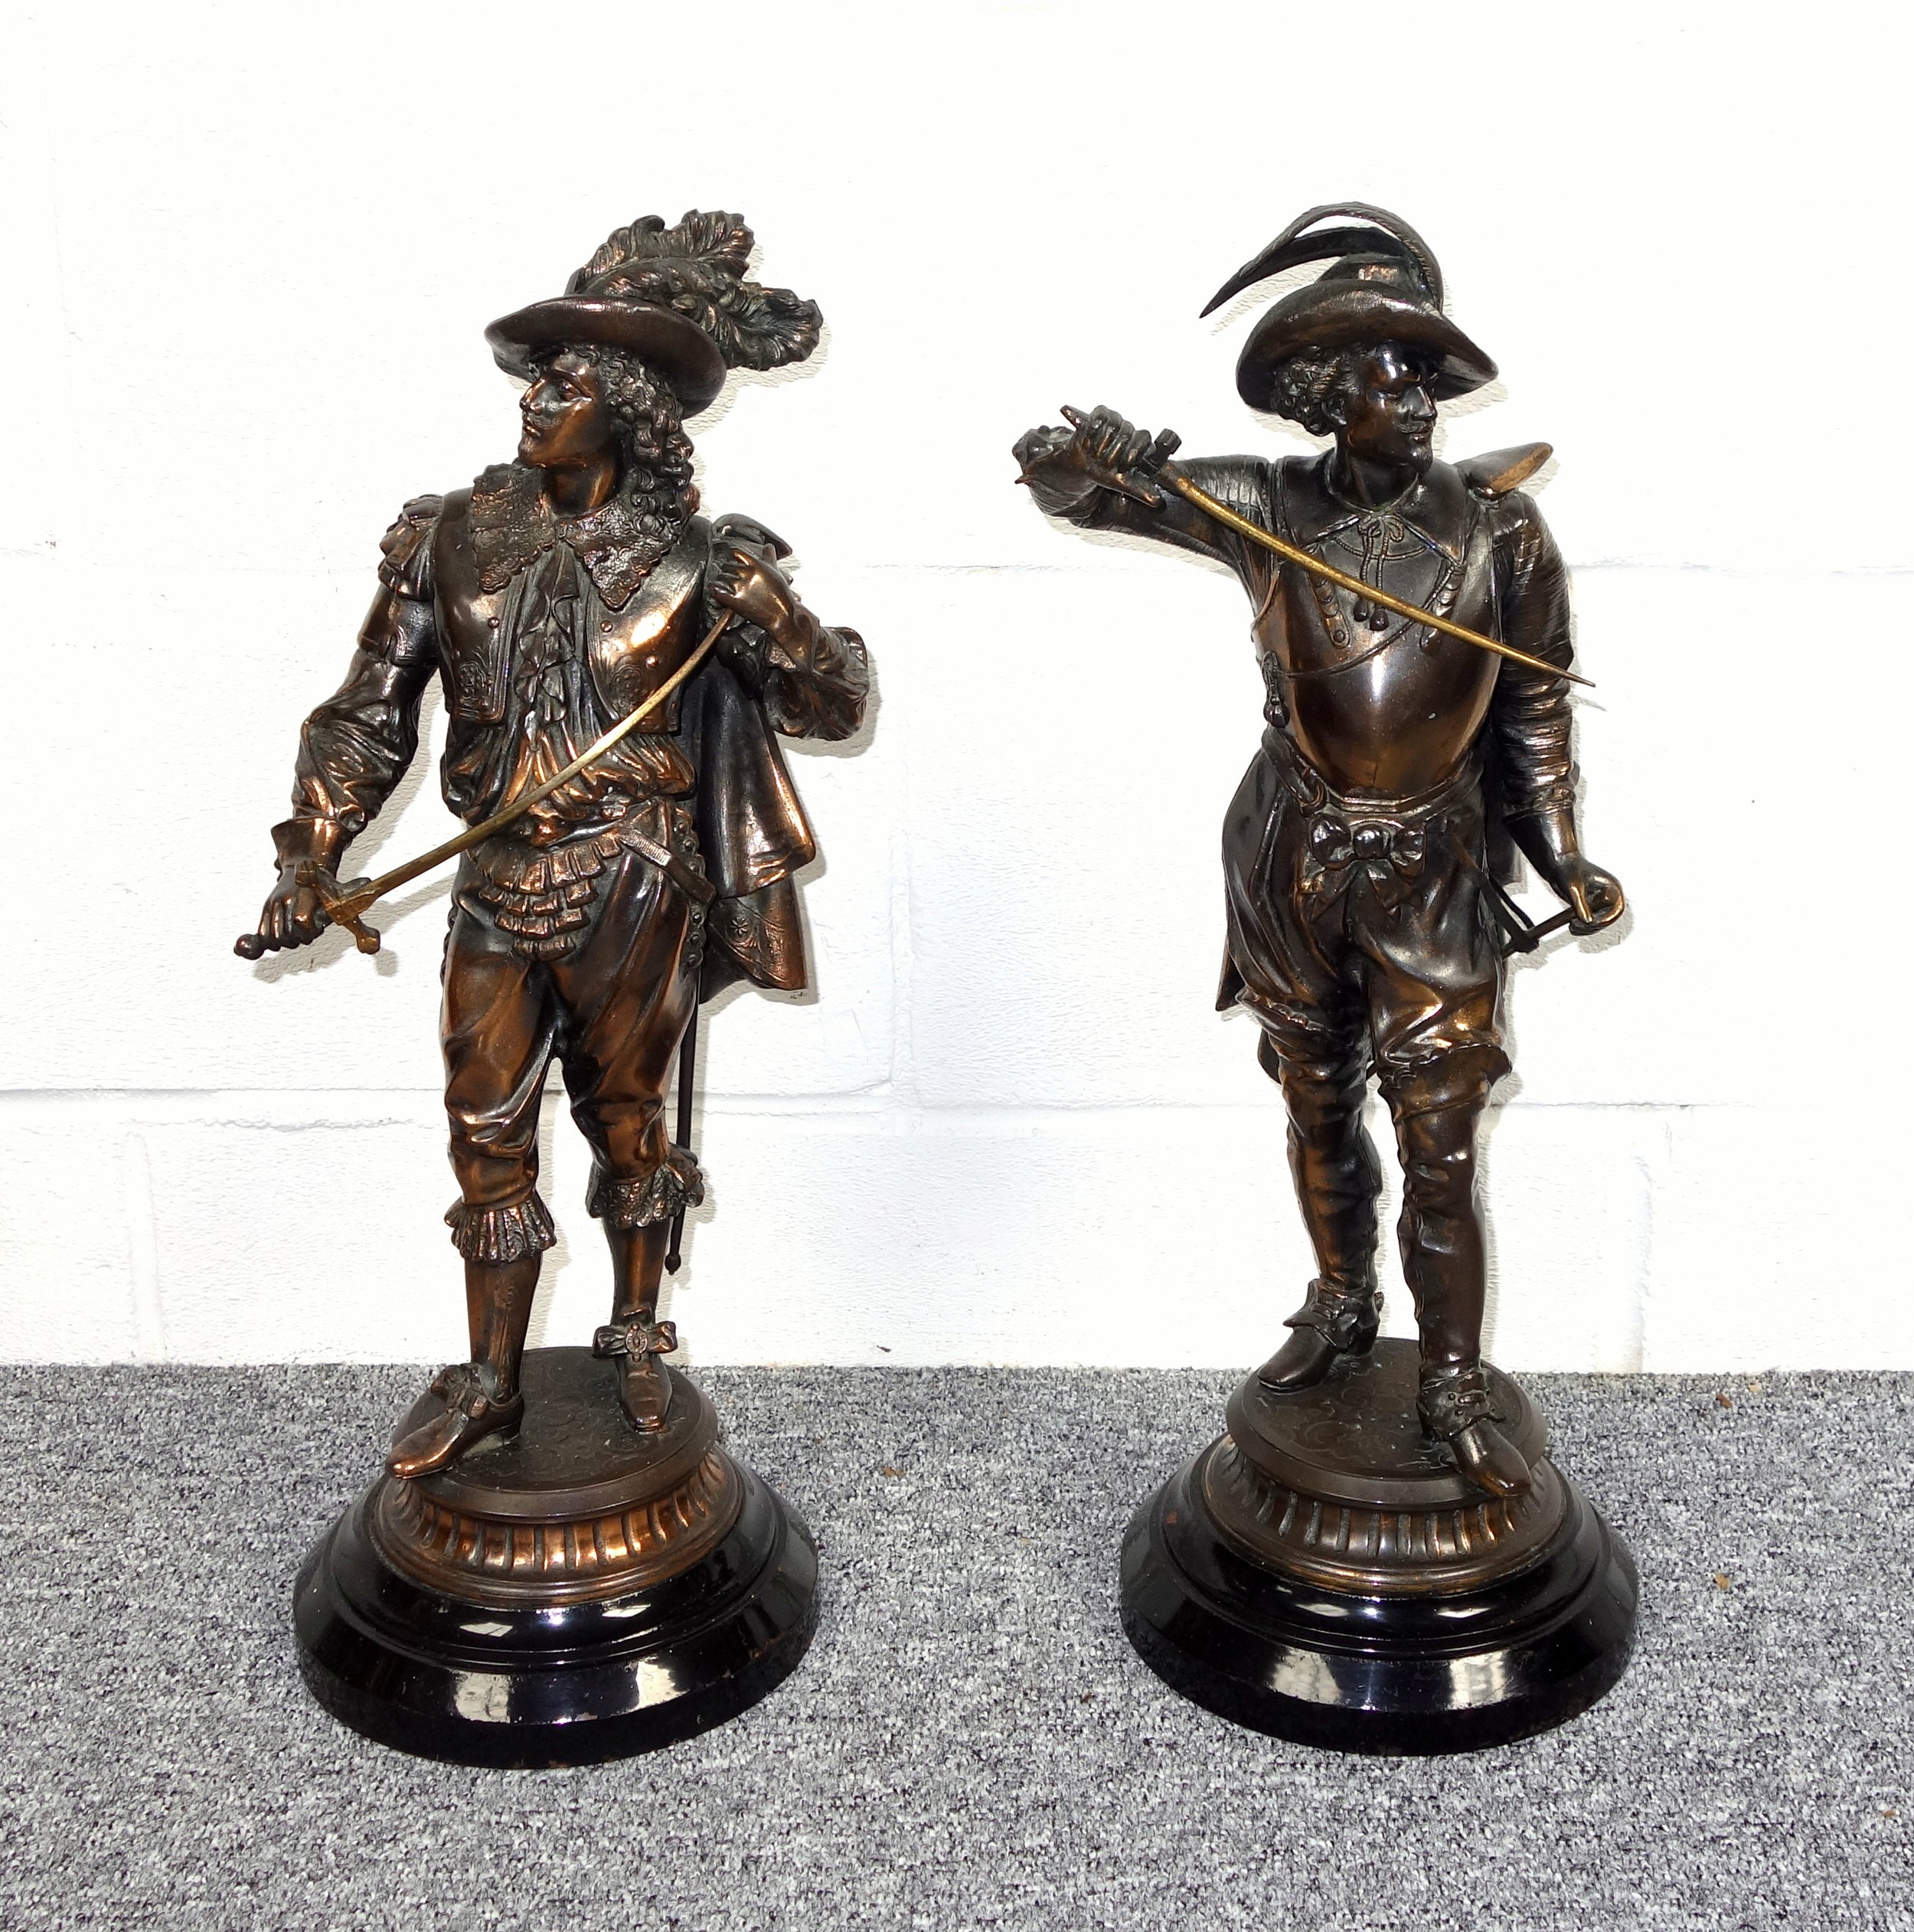 Pair of Late 19th Century French spelter figures of courtiers, each with a sword, standing on a